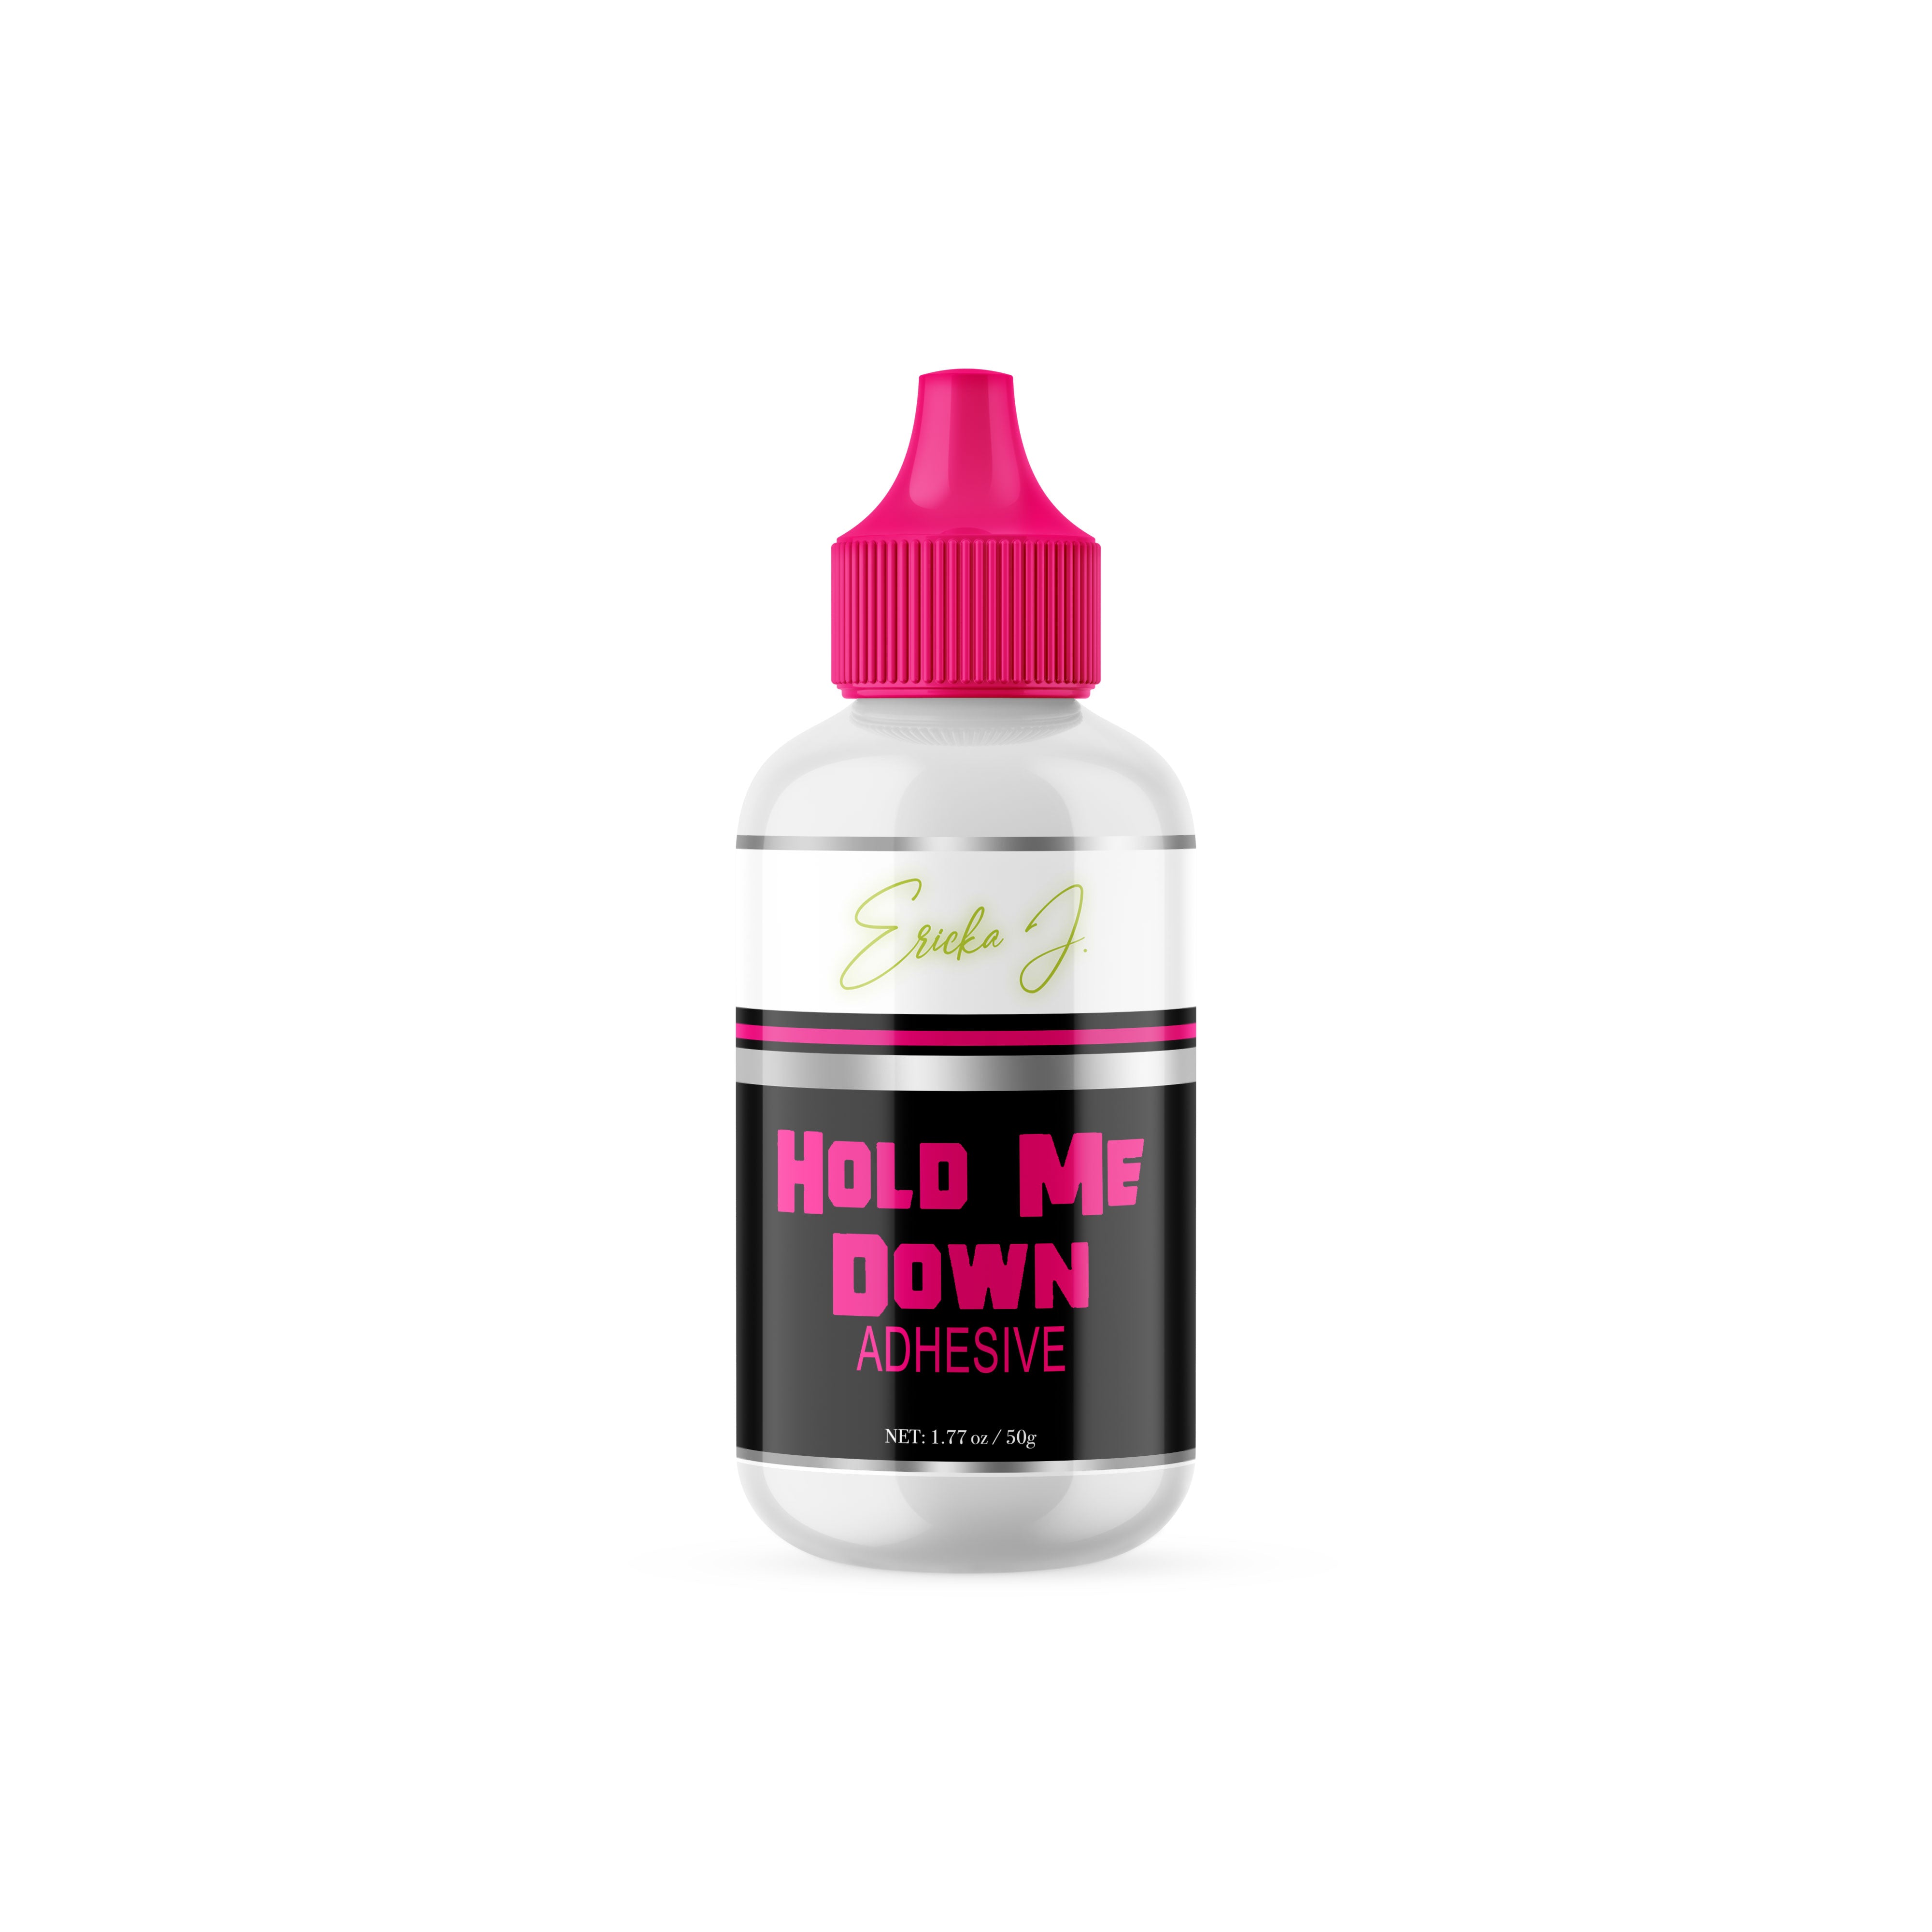 All Natural Hair Care Products: Hold Me Down ™ Adhesive Skin Guard